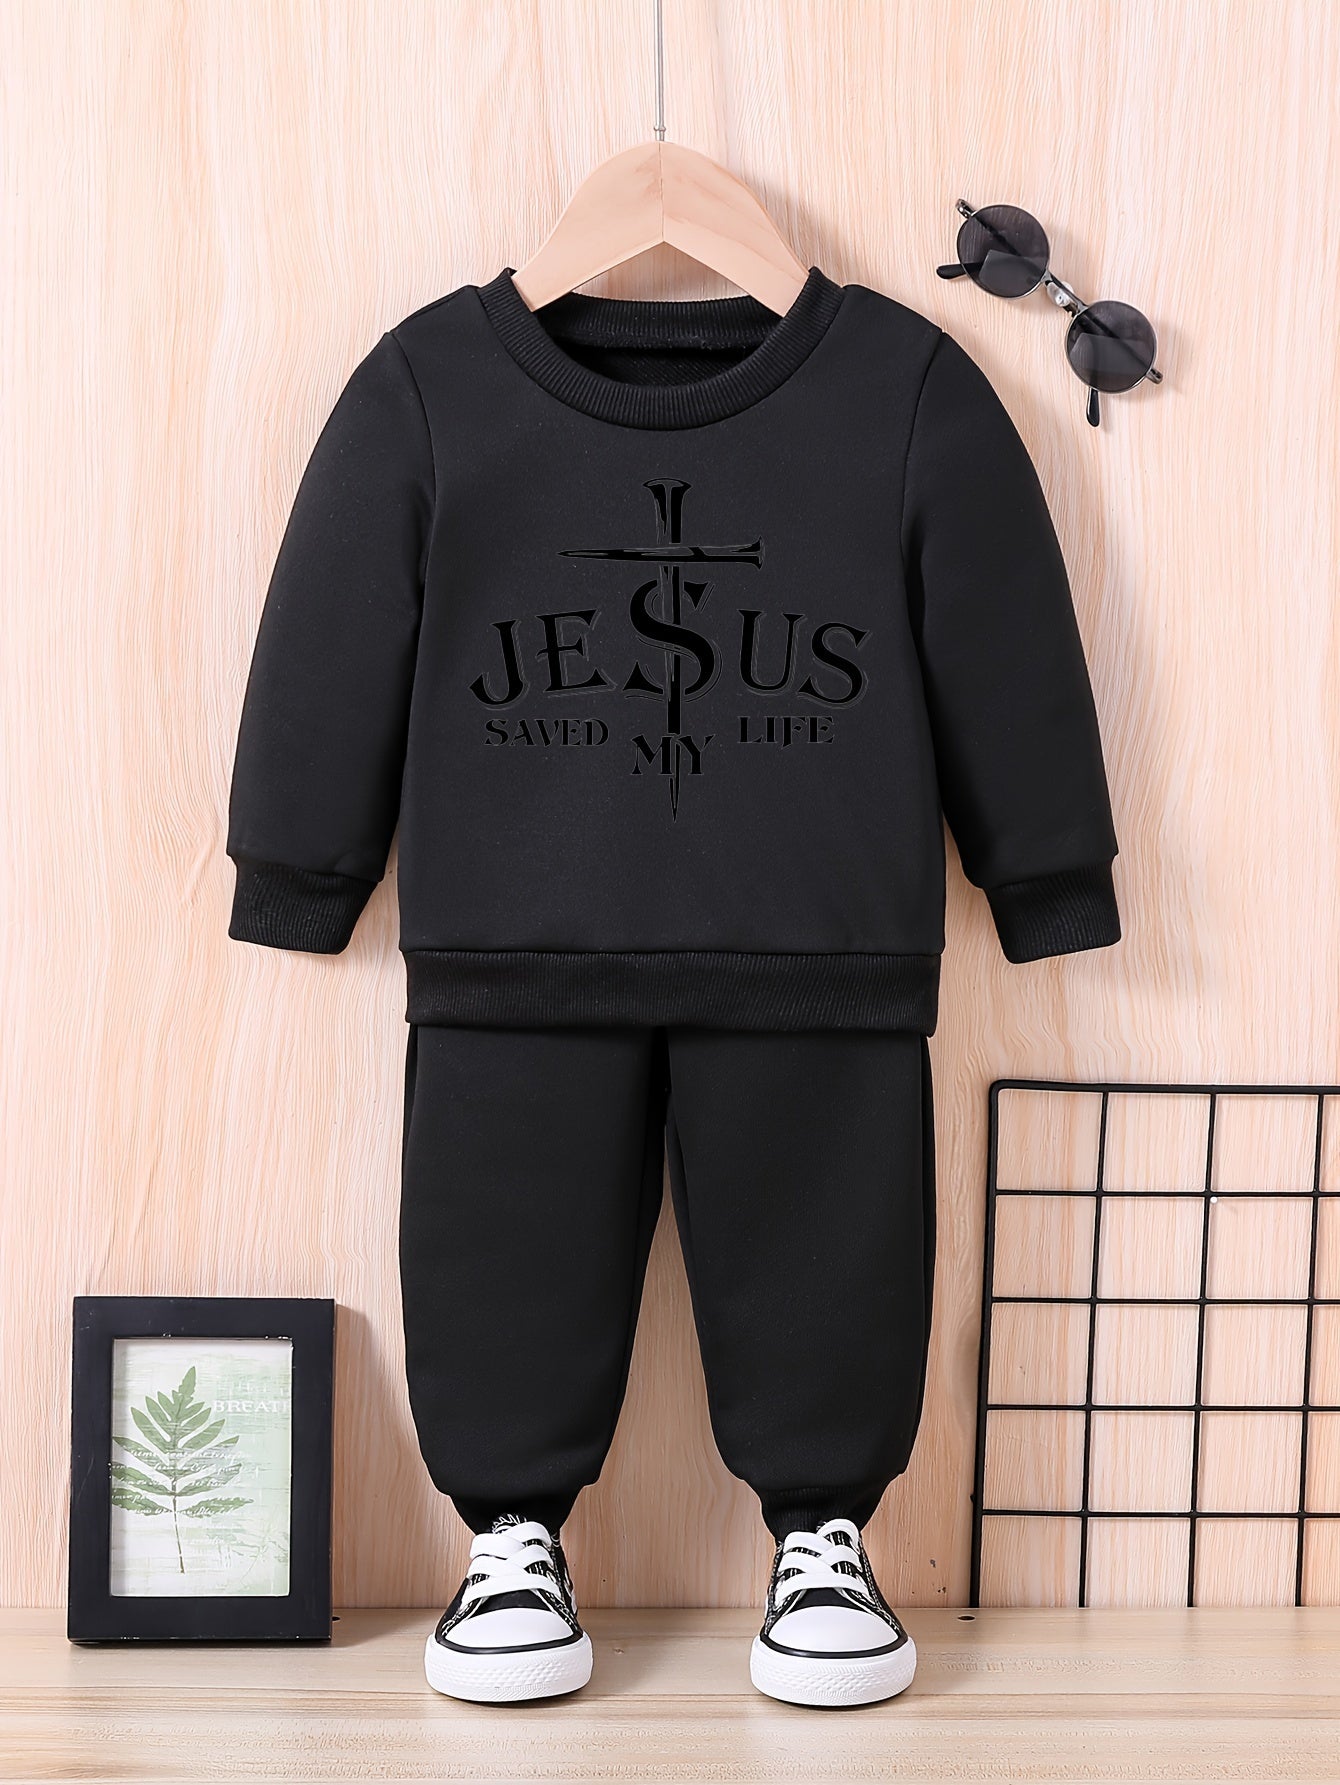 JESUS SAVED MY LIFE Christian Toddler Casual Outfit claimedbygoddesigns